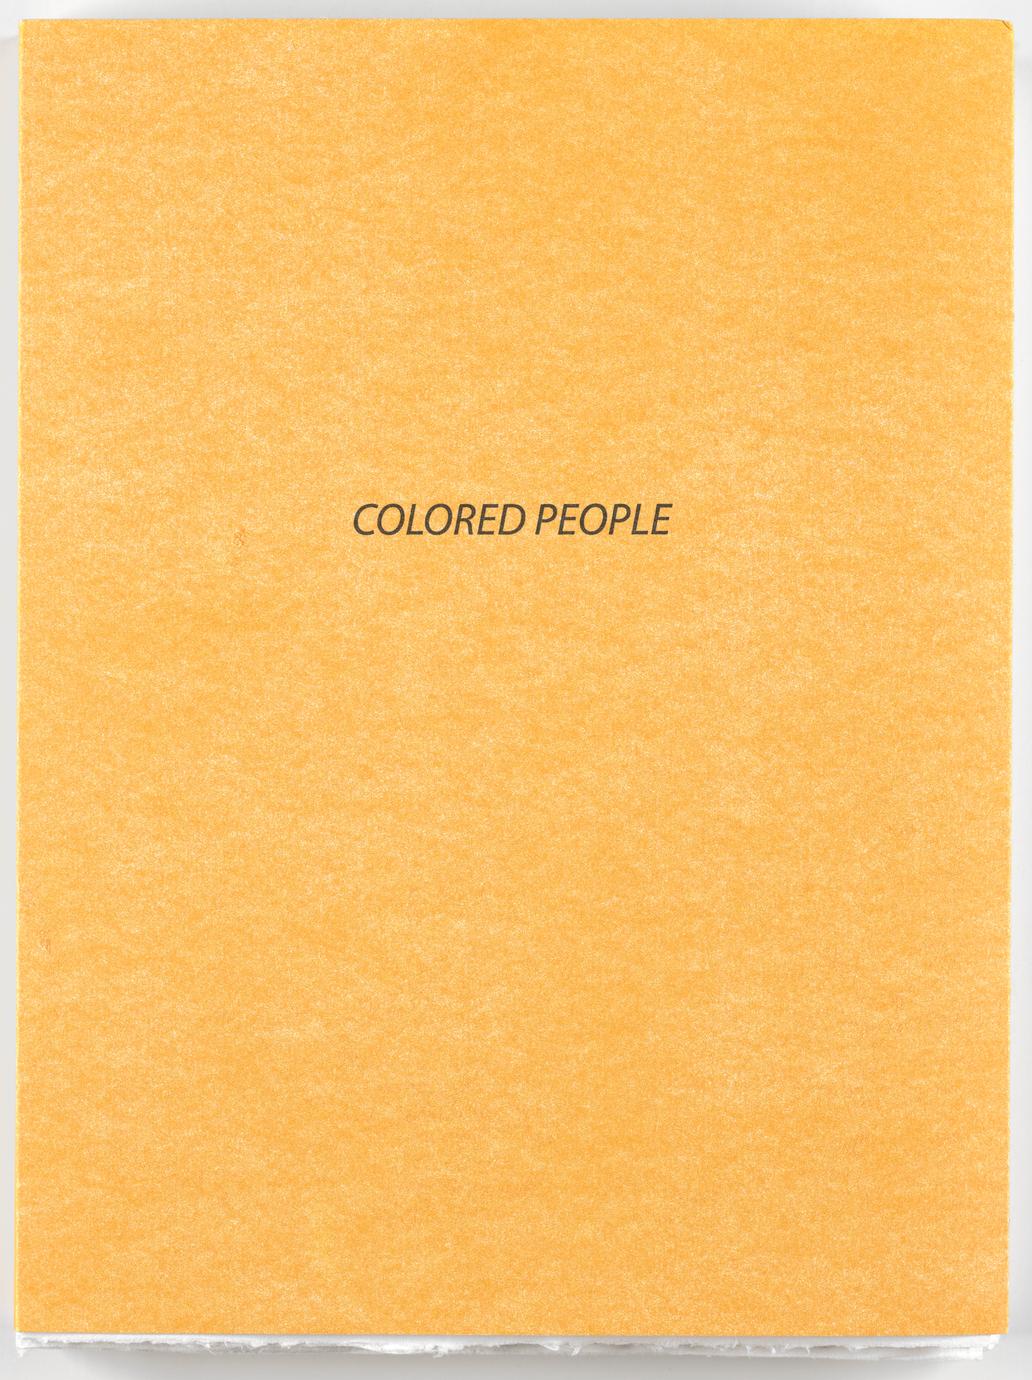 Colored people (1 of 4)